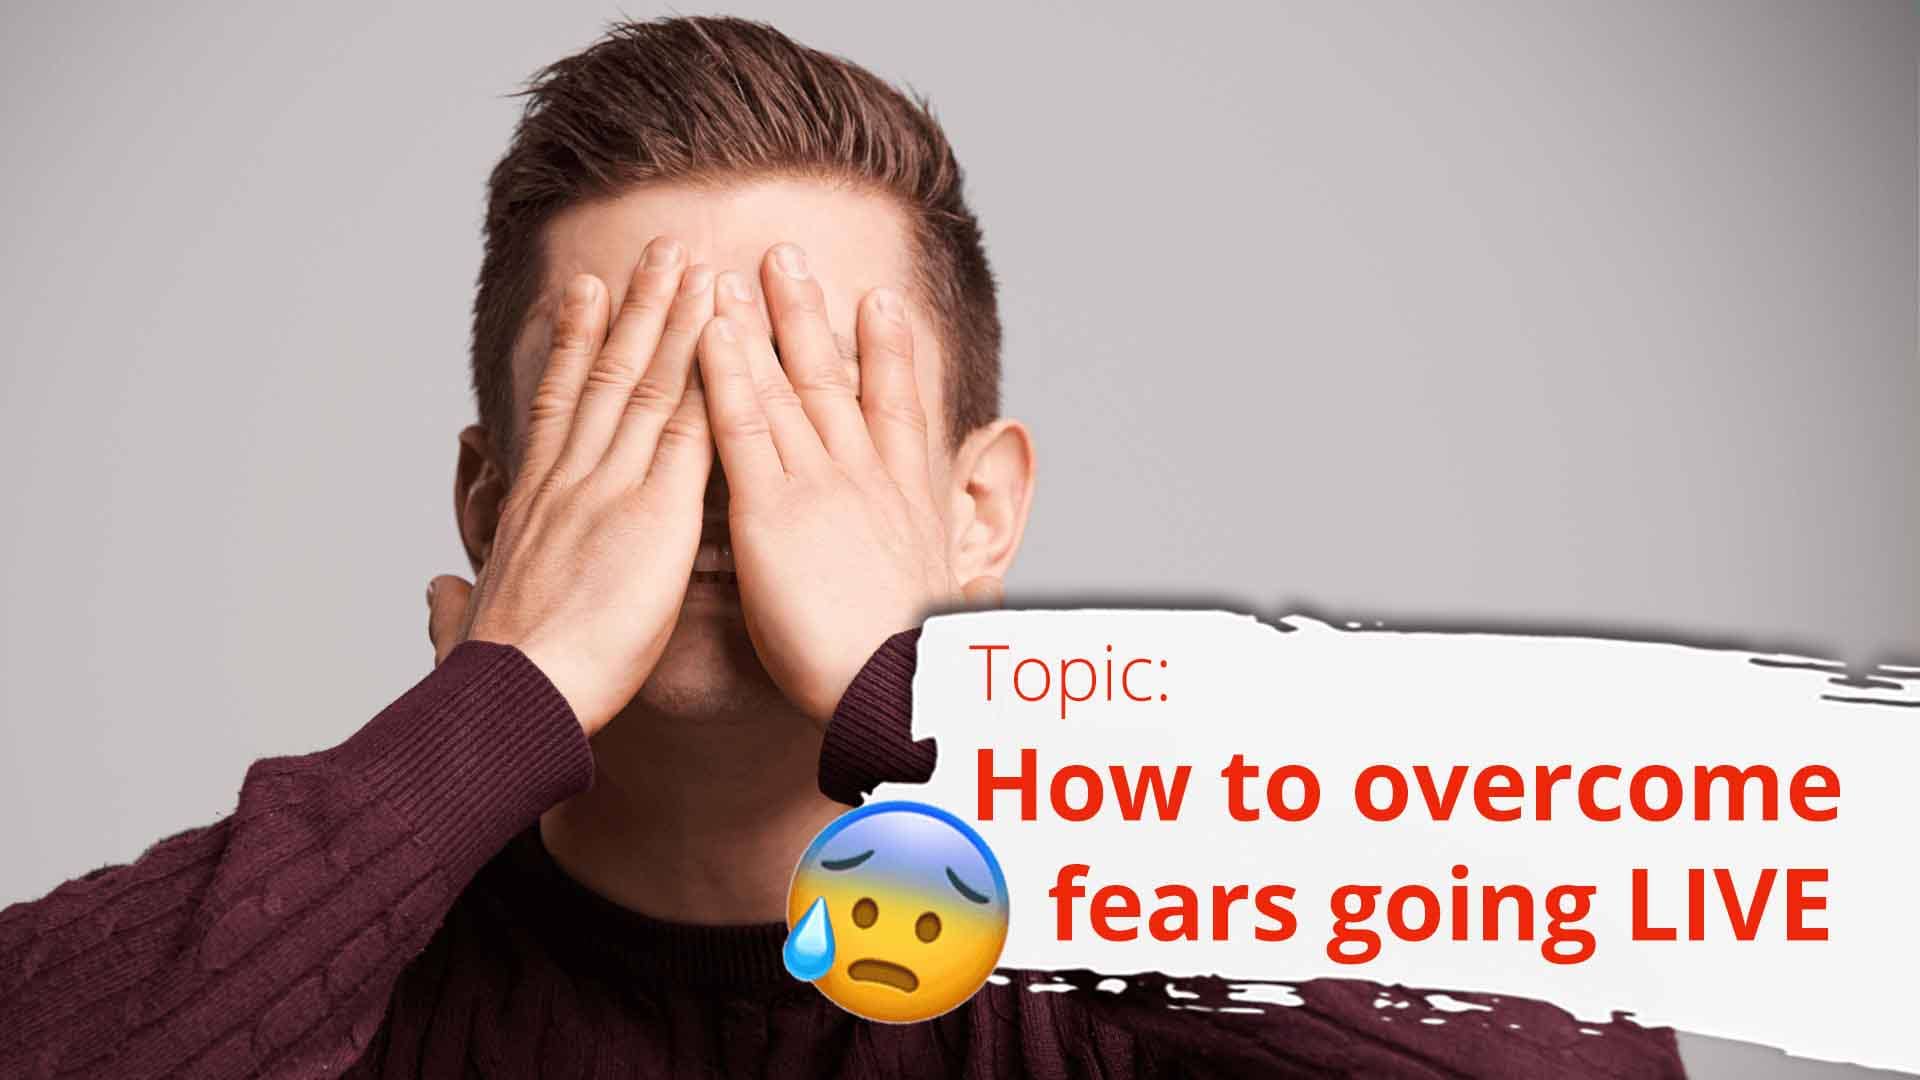 How to overcome fears going live